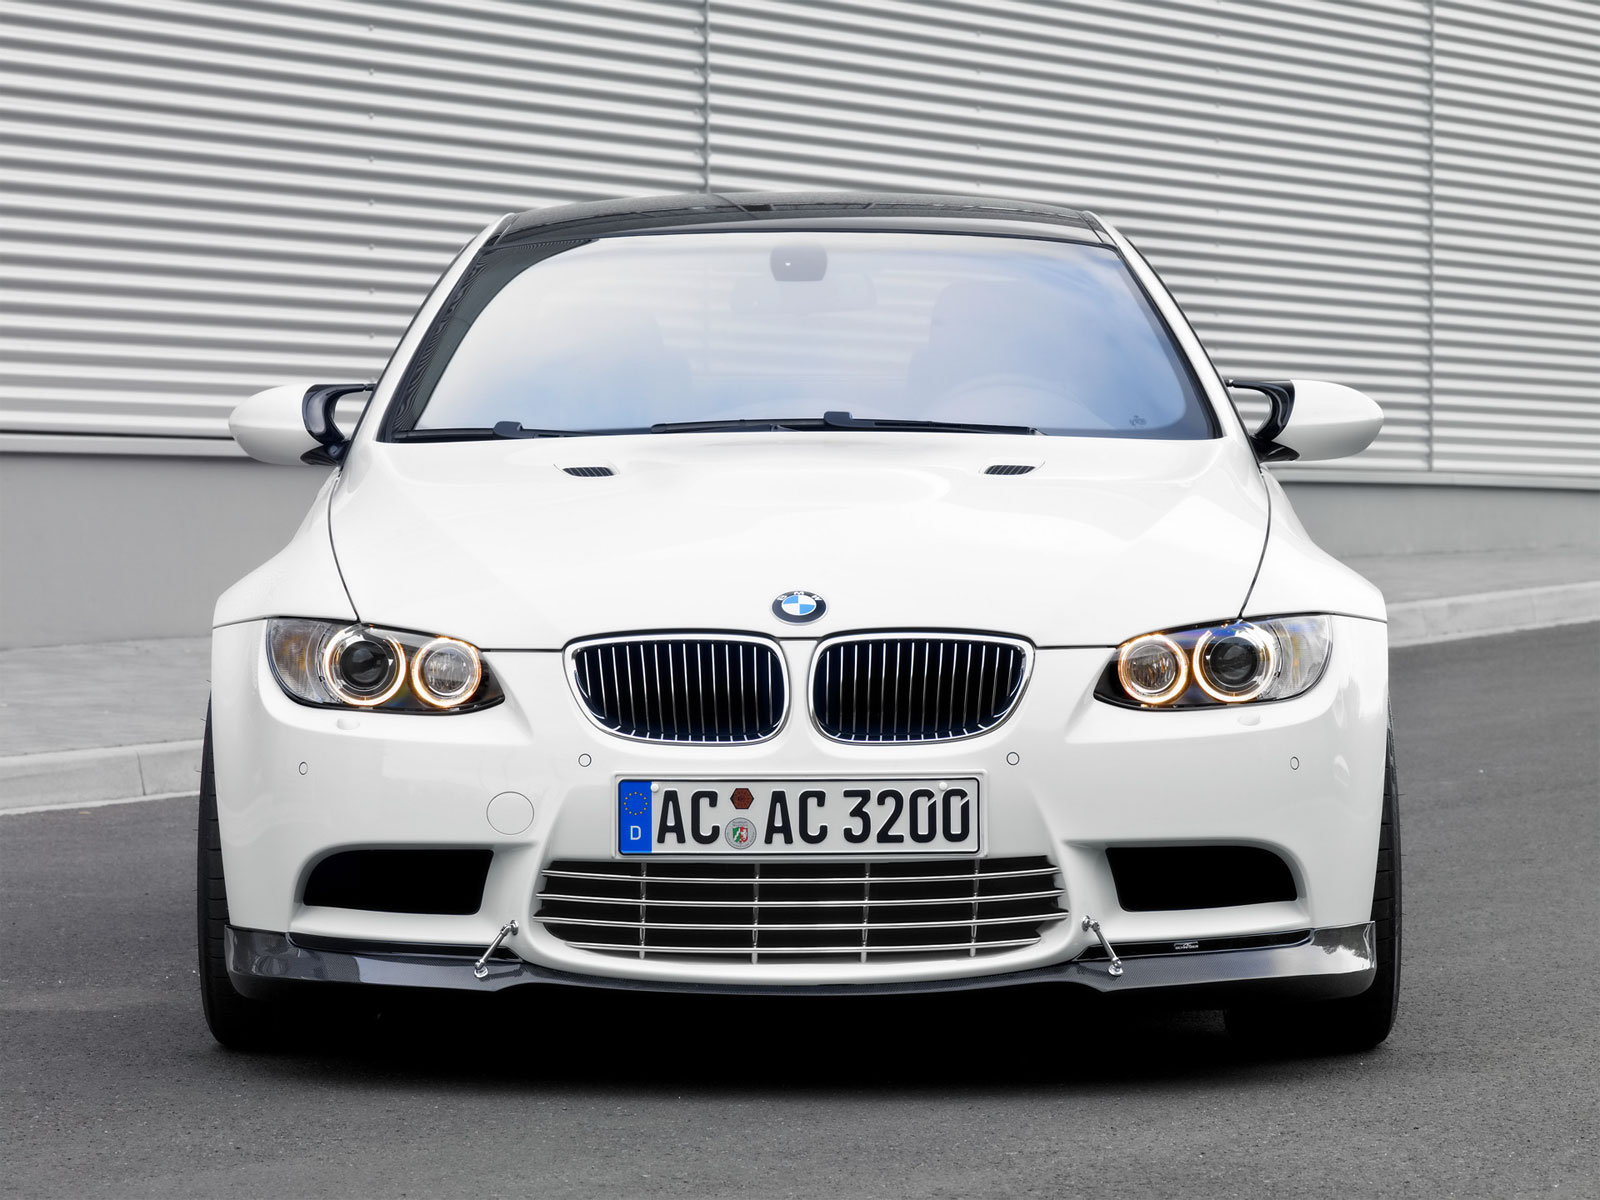 Hd Bmw Car Tyre Wallpaper Hd Bmw Car Wallpaper Hd - Number Plate For Bmw , HD Wallpaper & Backgrounds